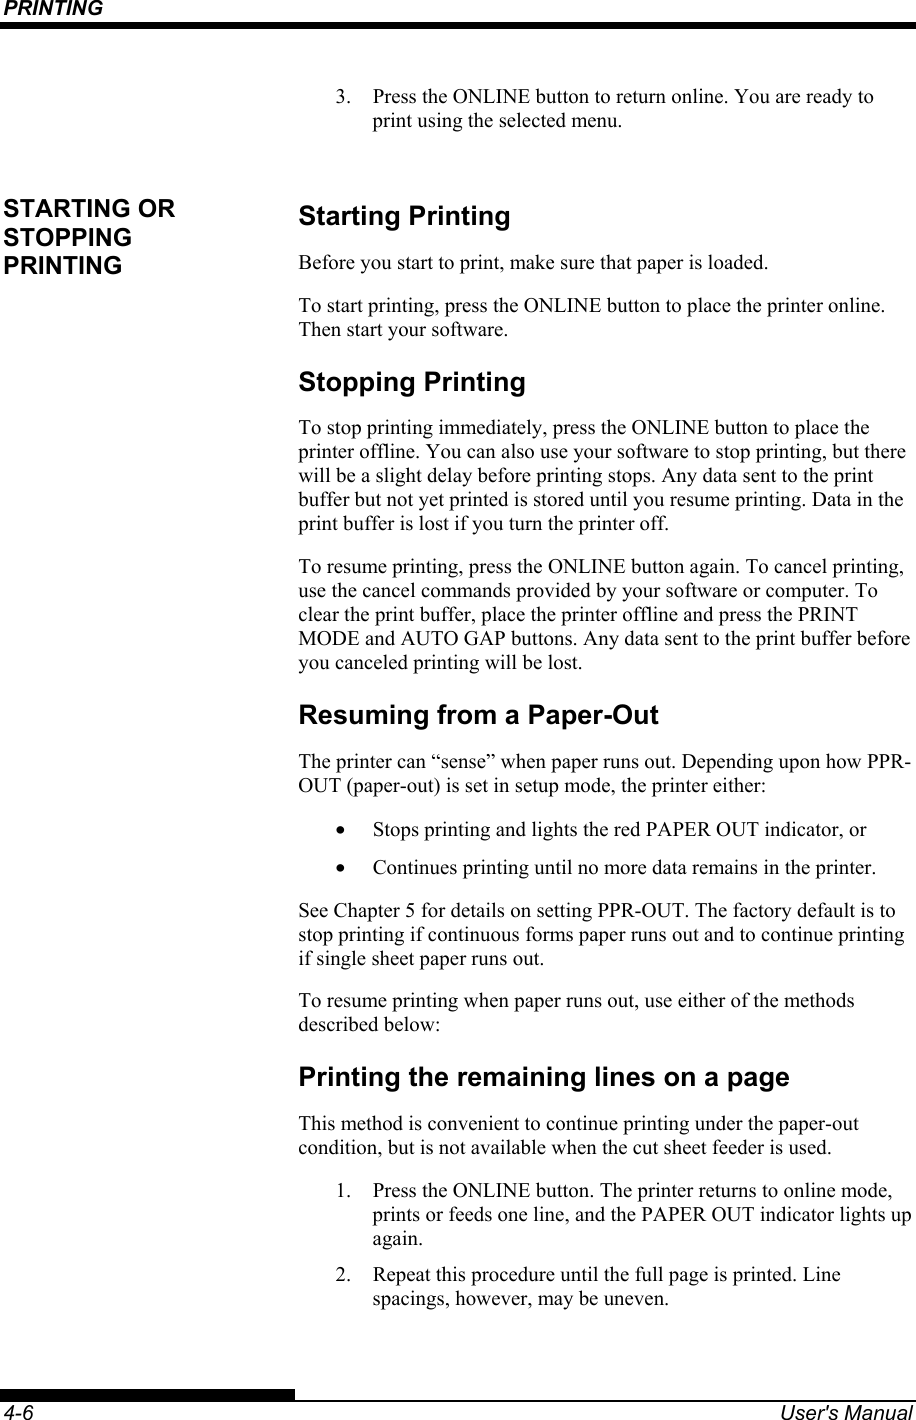 PRINTING    4-6  User&apos;s Manual 3.  Press the ONLINE button to return online. You are ready to print using the selected menu.  Starting Printing Before you start to print, make sure that paper is loaded. To start printing, press the ONLINE button to place the printer online. Then start your software. Stopping Printing To stop printing immediately, press the ONLINE button to place the printer offline. You can also use your software to stop printing, but there will be a slight delay before printing stops. Any data sent to the print buffer but not yet printed is stored until you resume printing. Data in the print buffer is lost if you turn the printer off. To resume printing, press the ONLINE button again. To cancel printing, use the cancel commands provided by your software or computer. To clear the print buffer, place the printer offline and press the PRINT MODE and AUTO GAP buttons. Any data sent to the print buffer before you canceled printing will be lost. Resuming from a Paper-Out The printer can “sense” when paper runs out. Depending upon how PPR-OUT (paper-out) is set in setup mode, the printer either: •  Stops printing and lights the red PAPER OUT indicator, or •  Continues printing until no more data remains in the printer. See Chapter 5 for details on setting PPR-OUT. The factory default is to stop printing if continuous forms paper runs out and to continue printing if single sheet paper runs out. To resume printing when paper runs out, use either of the methods described below: Printing the remaining lines on a page This method is convenient to continue printing under the paper-out condition, but is not available when the cut sheet feeder is used. 1.  Press the ONLINE button. The printer returns to online mode, prints or feeds one line, and the PAPER OUT indicator lights up again. 2.  Repeat this procedure until the full page is printed. Line spacings, however, may be uneven. STARTING OR STOPPING PRINTING 